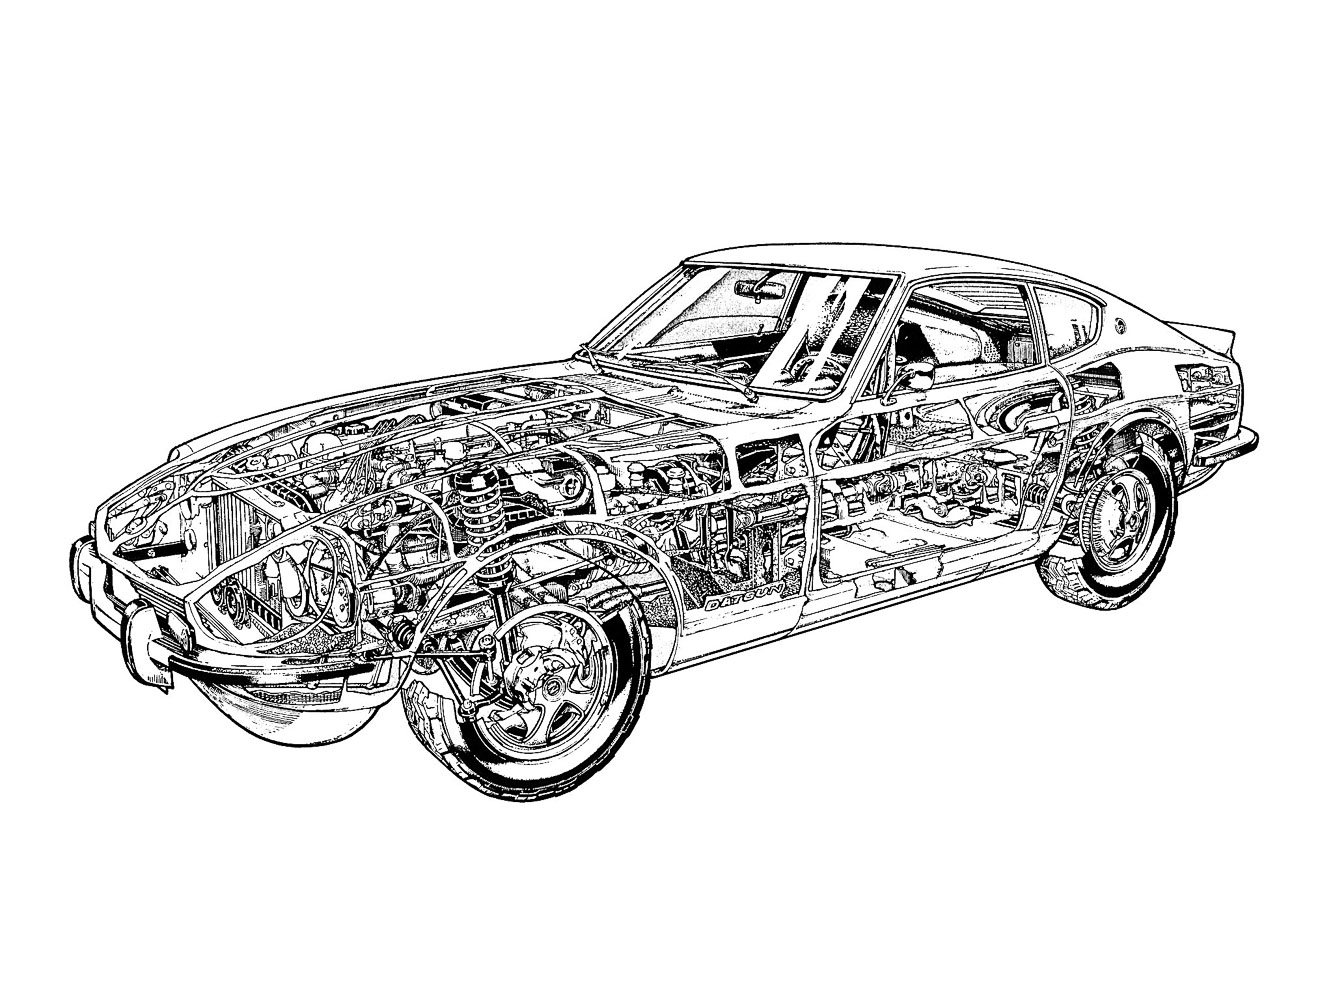 Superb profile of the 240Z, with lines that have not dated